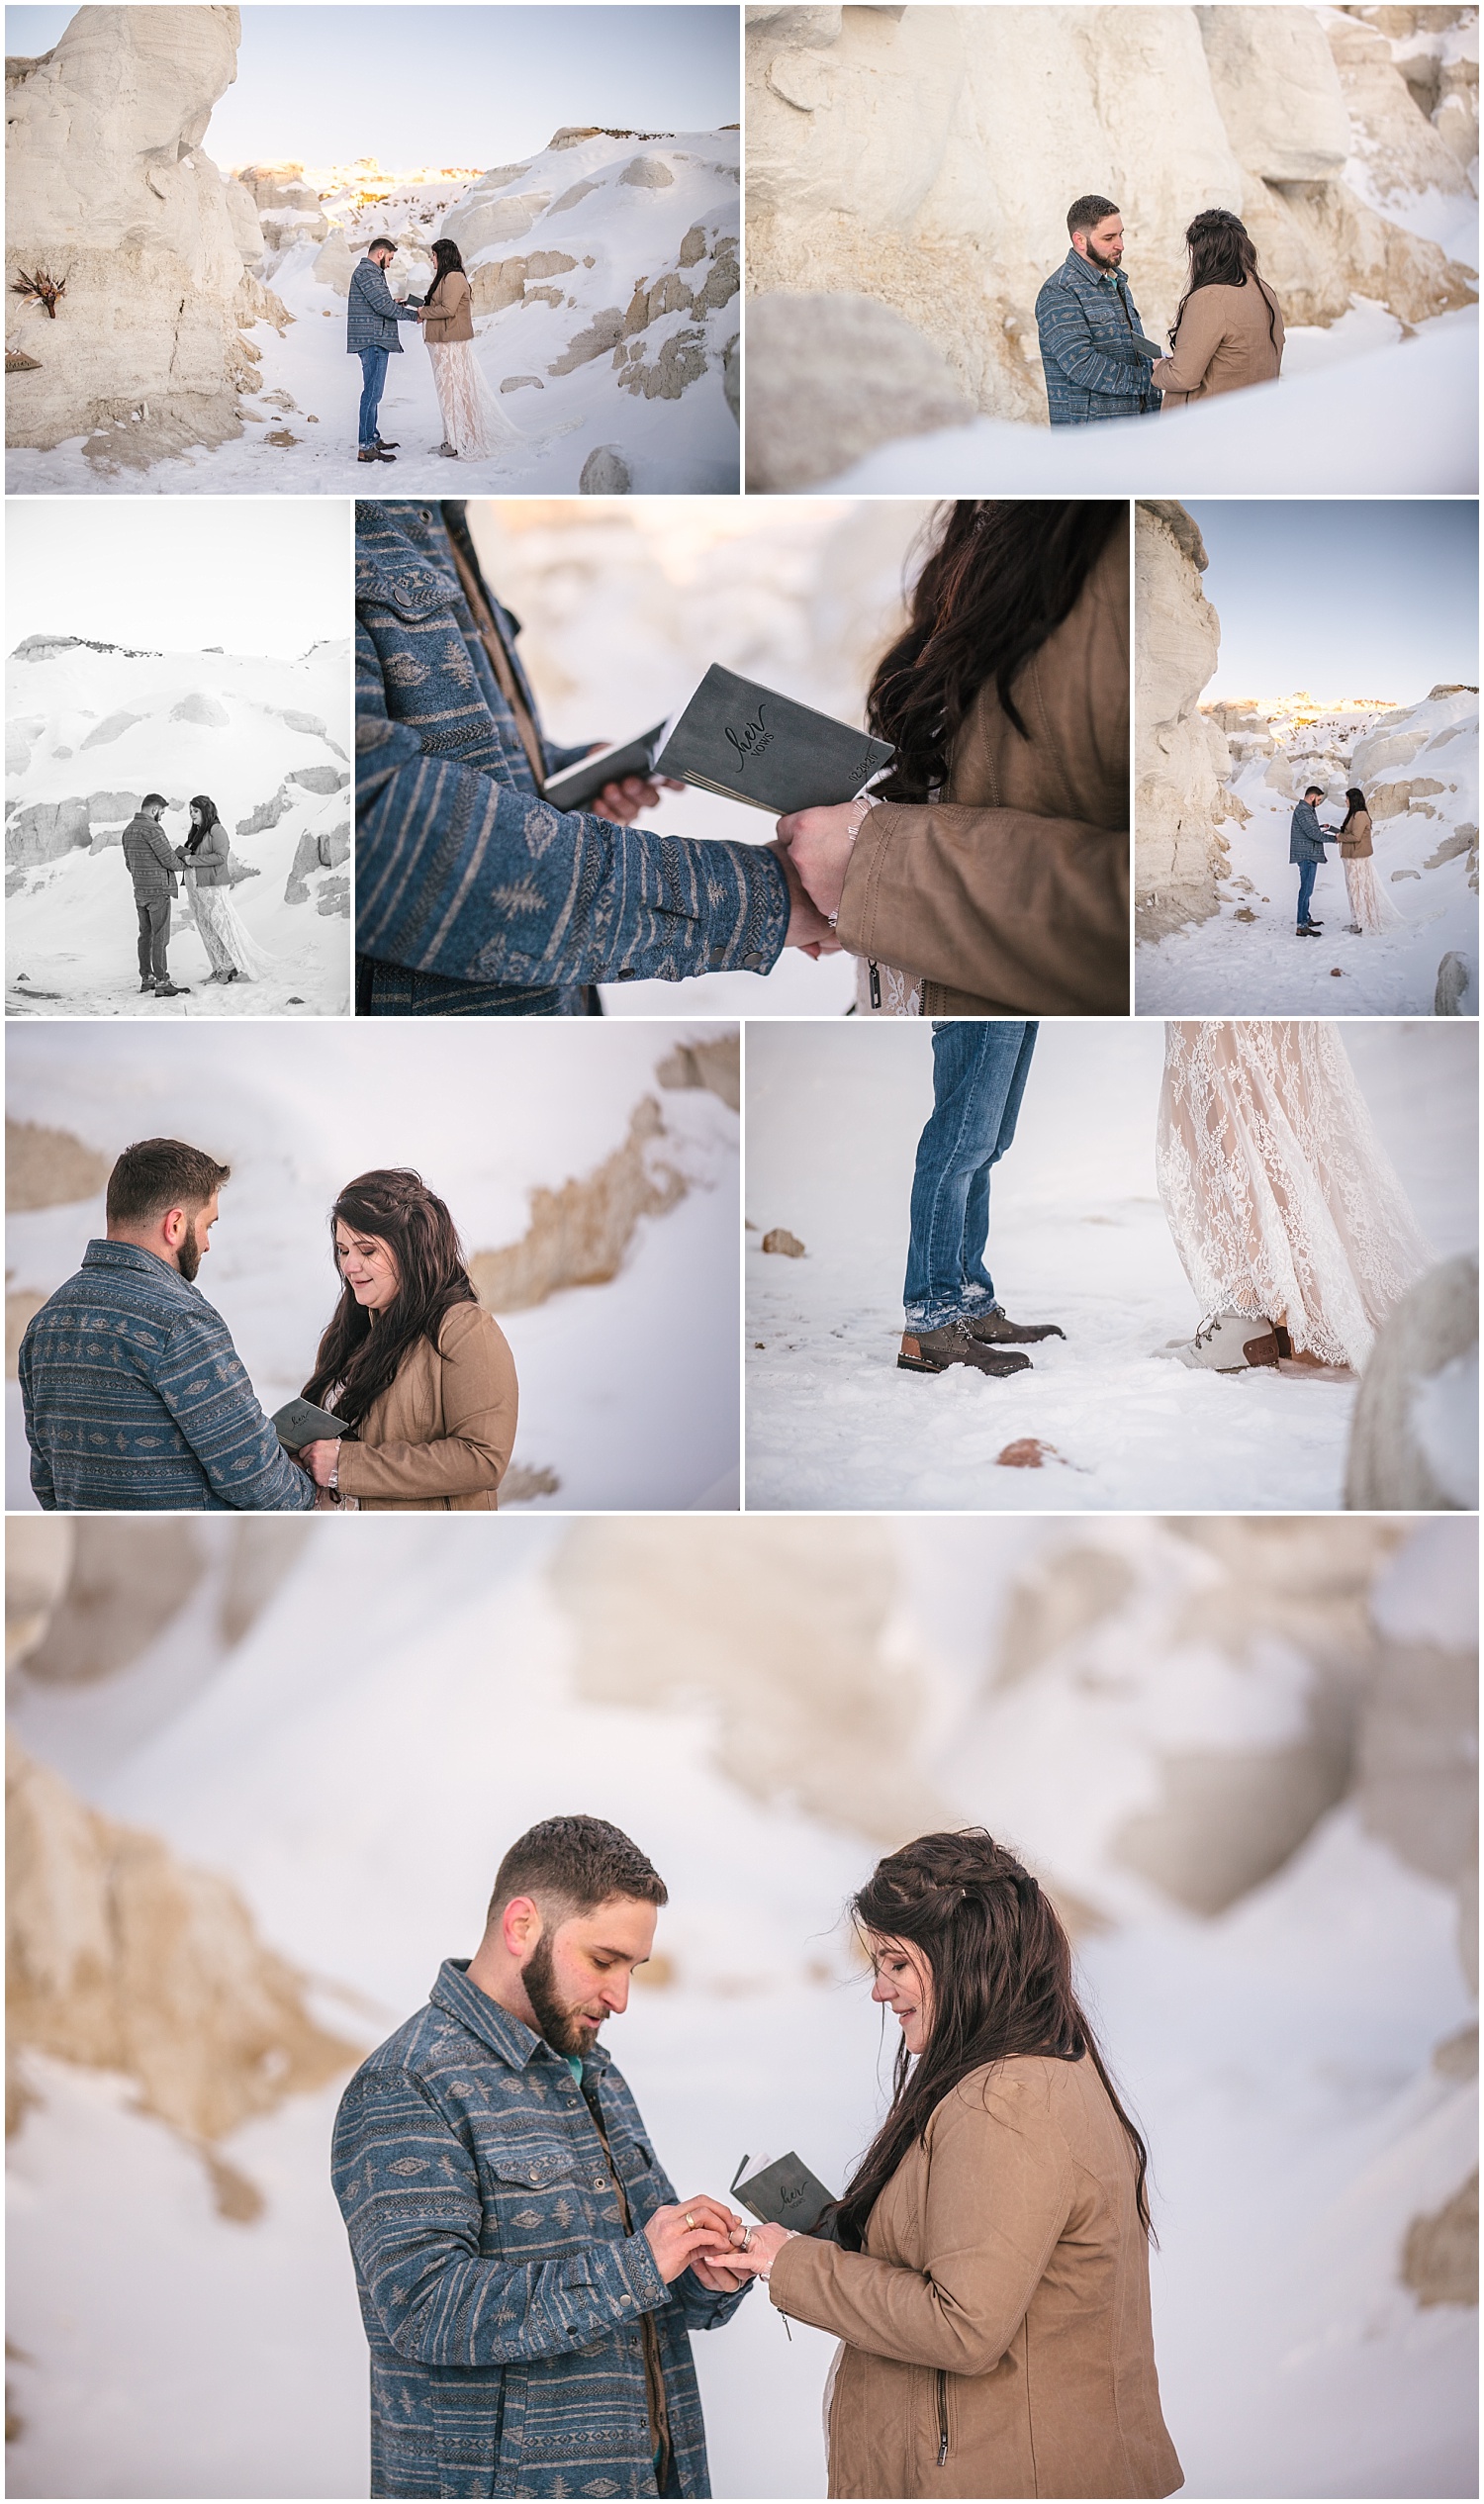 Winter Paint Mines elopement private ceremony between just bride and groom